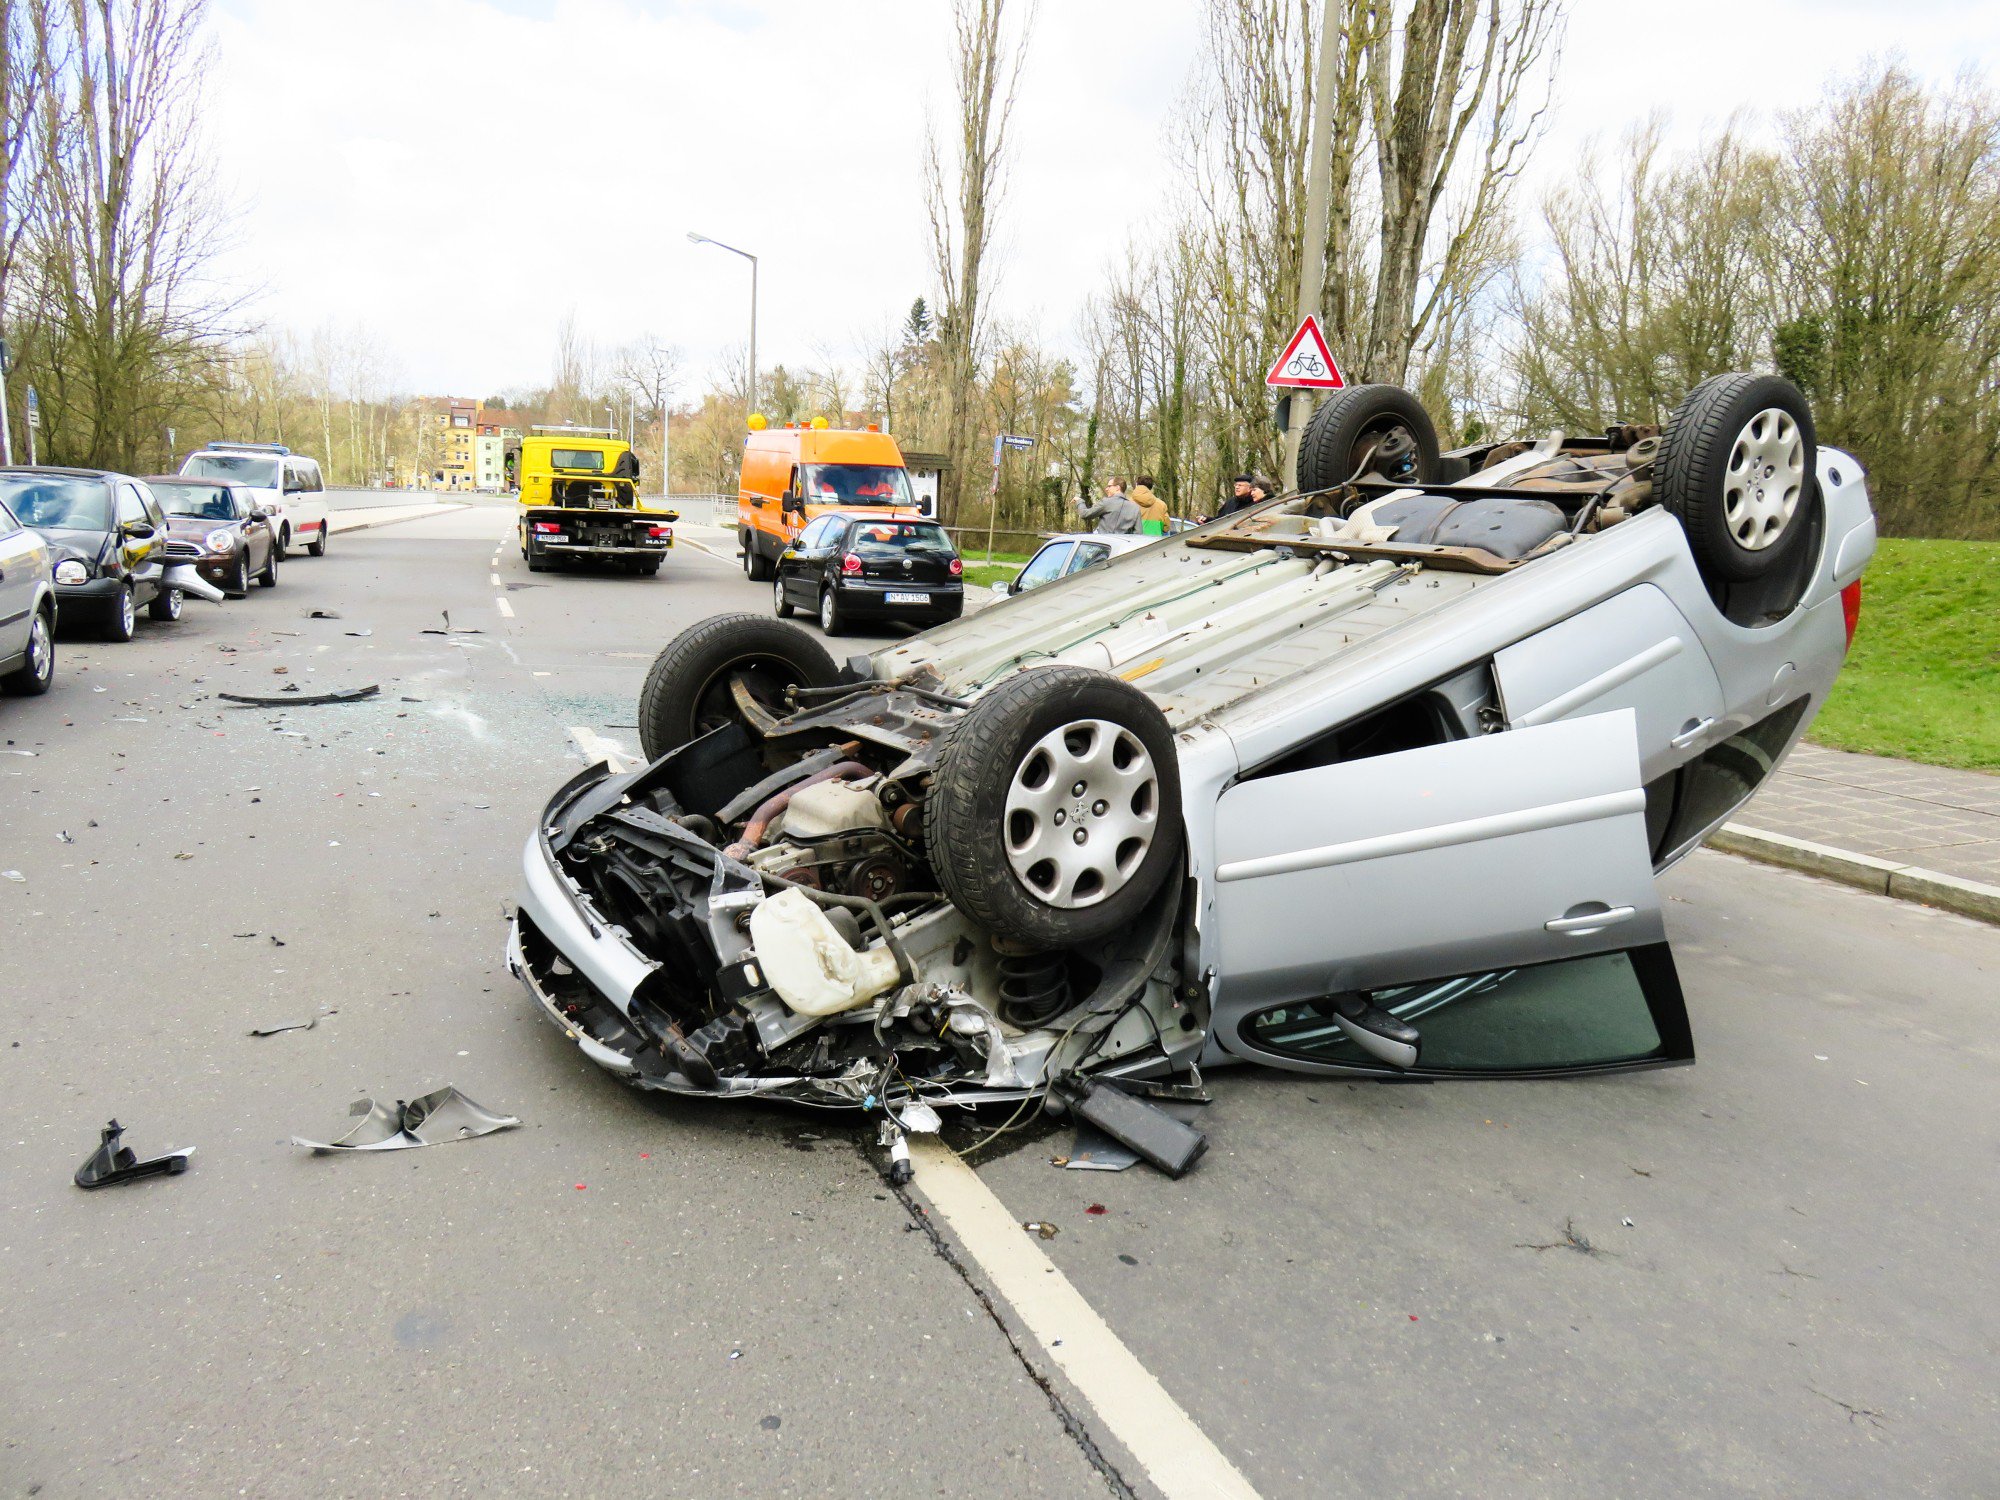 Scrapping vs Insurance Payout on a Totaled Vehicle: Which Is Better?